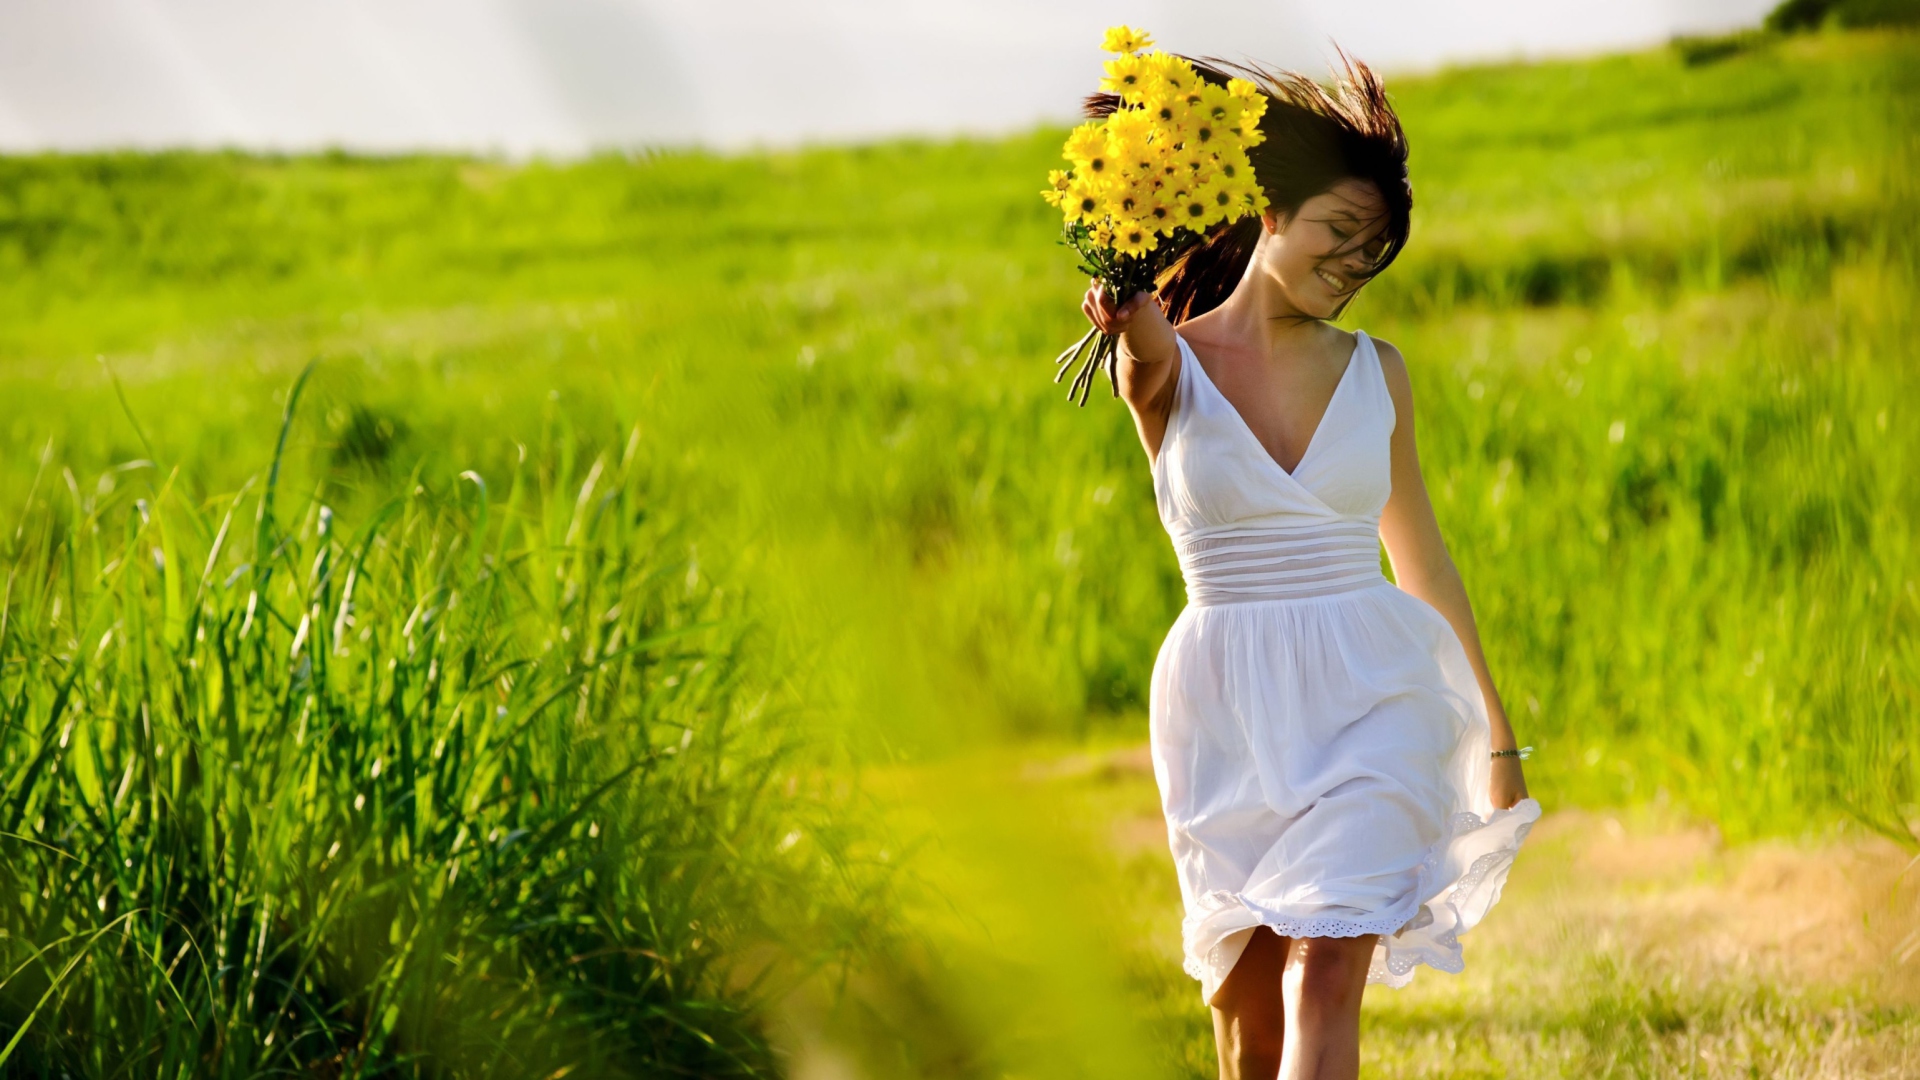 Girl With Yellow Flowers In Field screenshot #1 1920x1080